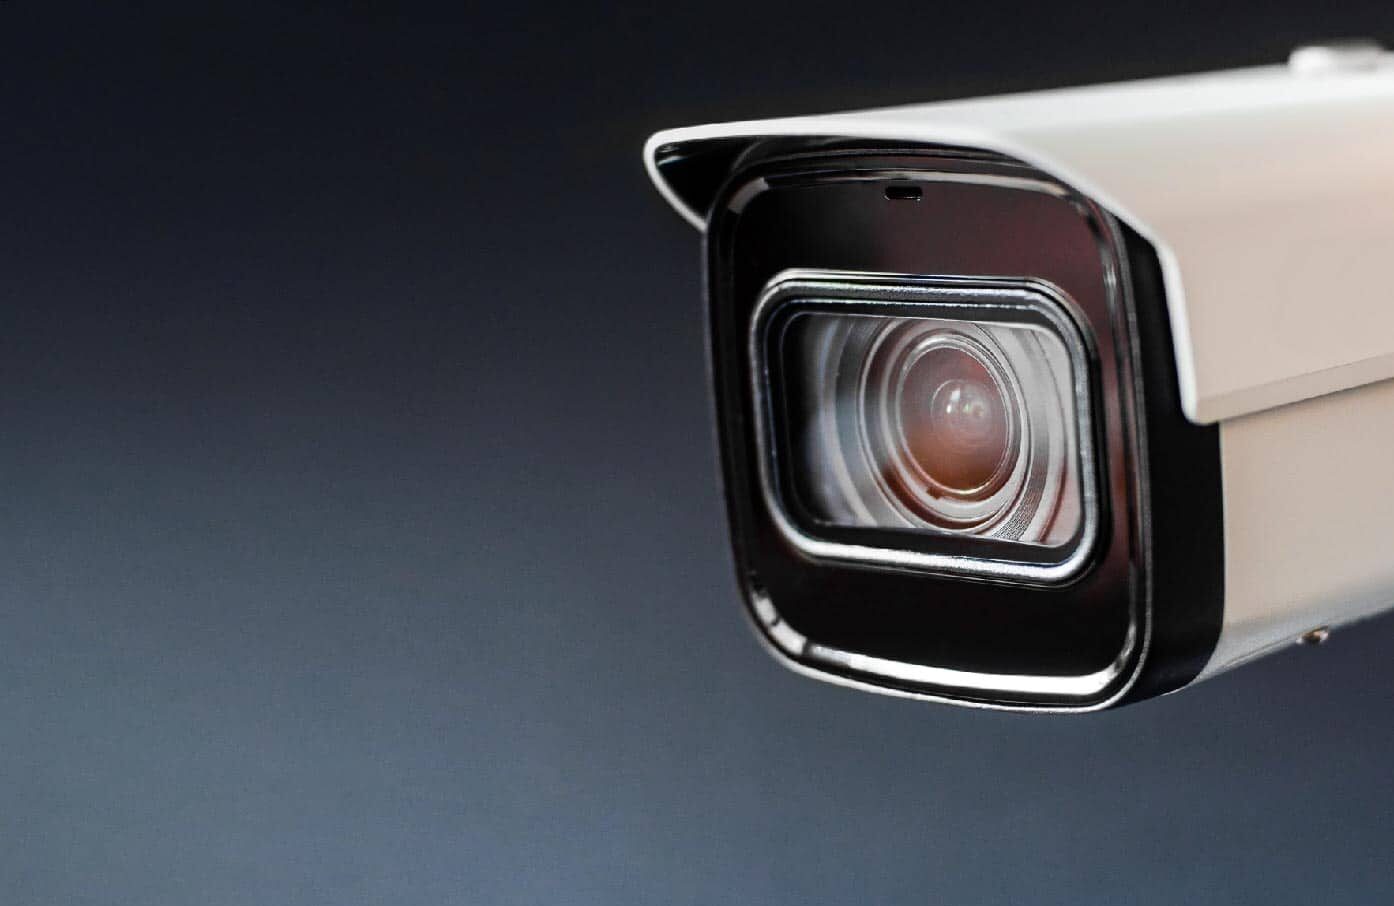 A close up view of a security camera.